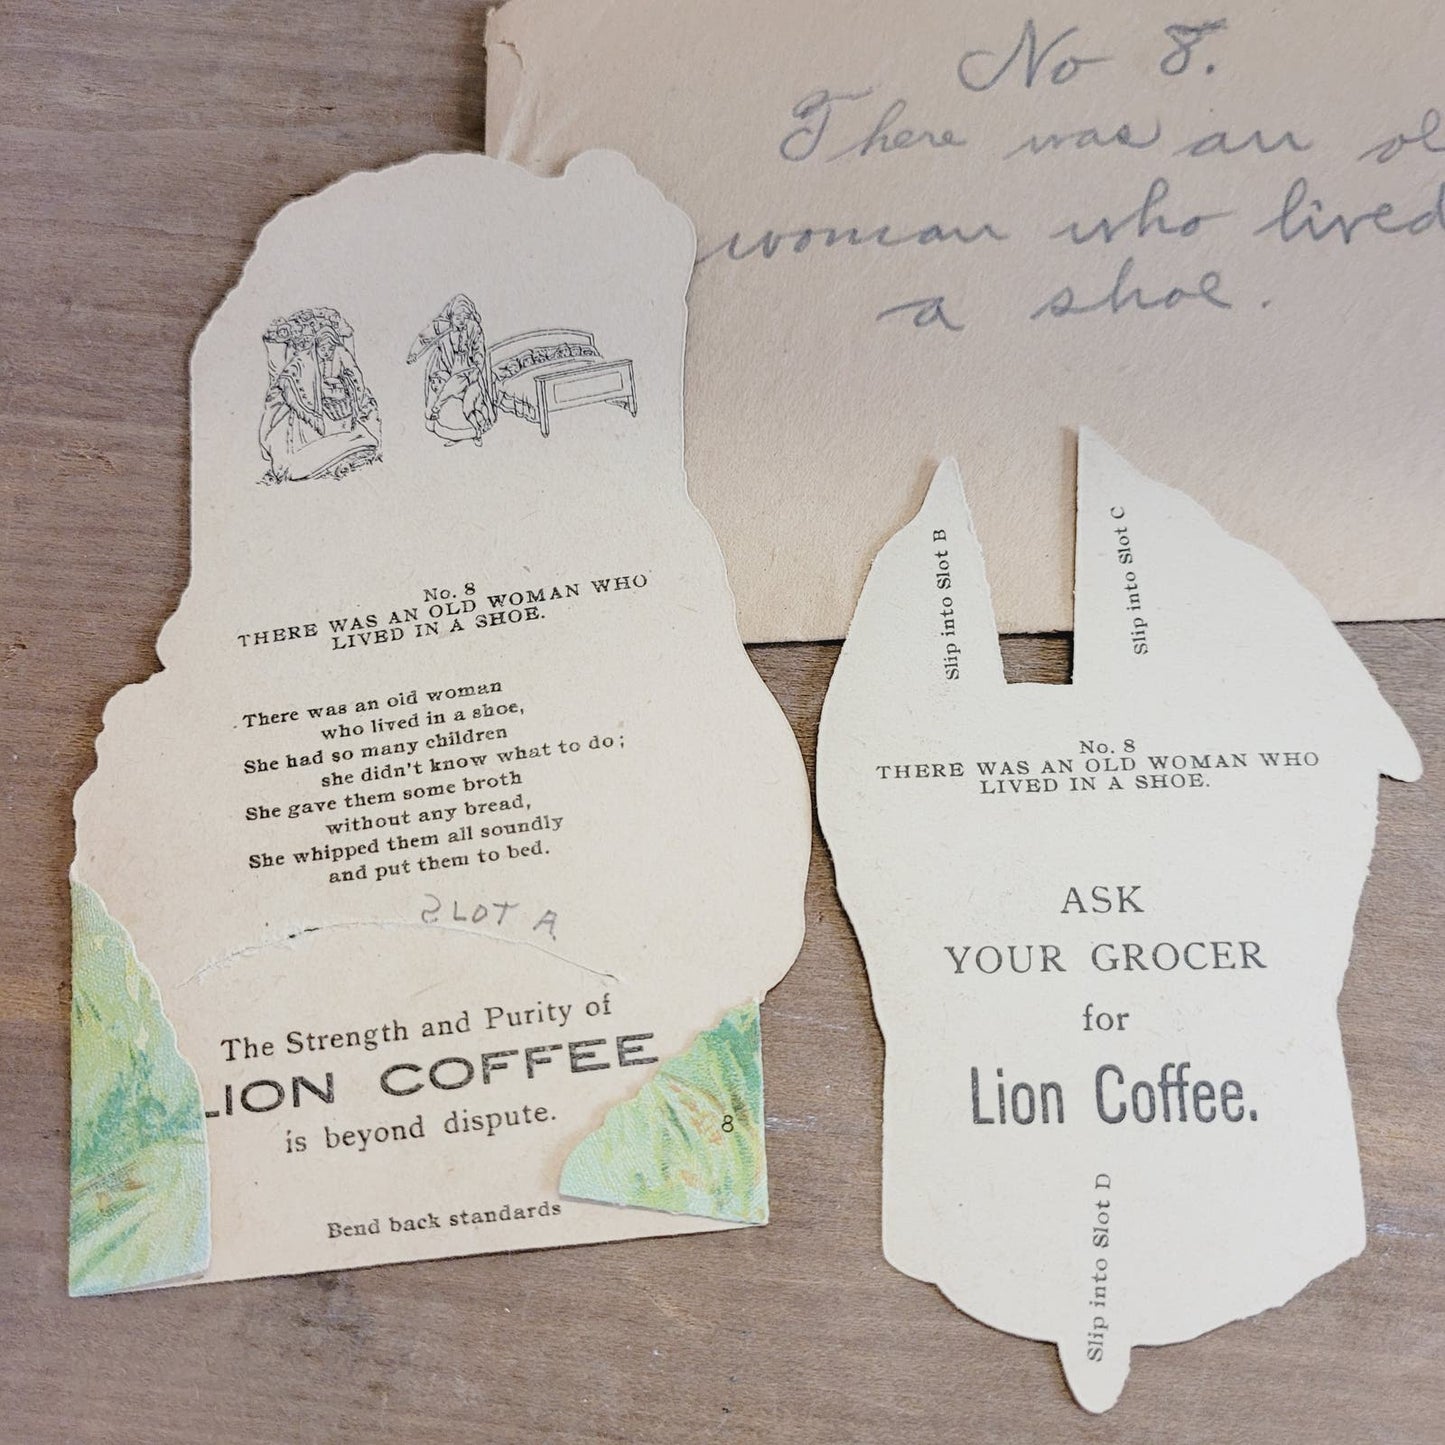 1890s Lion Coffee No. 8 "There Was An Old Lady Who Lived in a Shoe" Trade Card